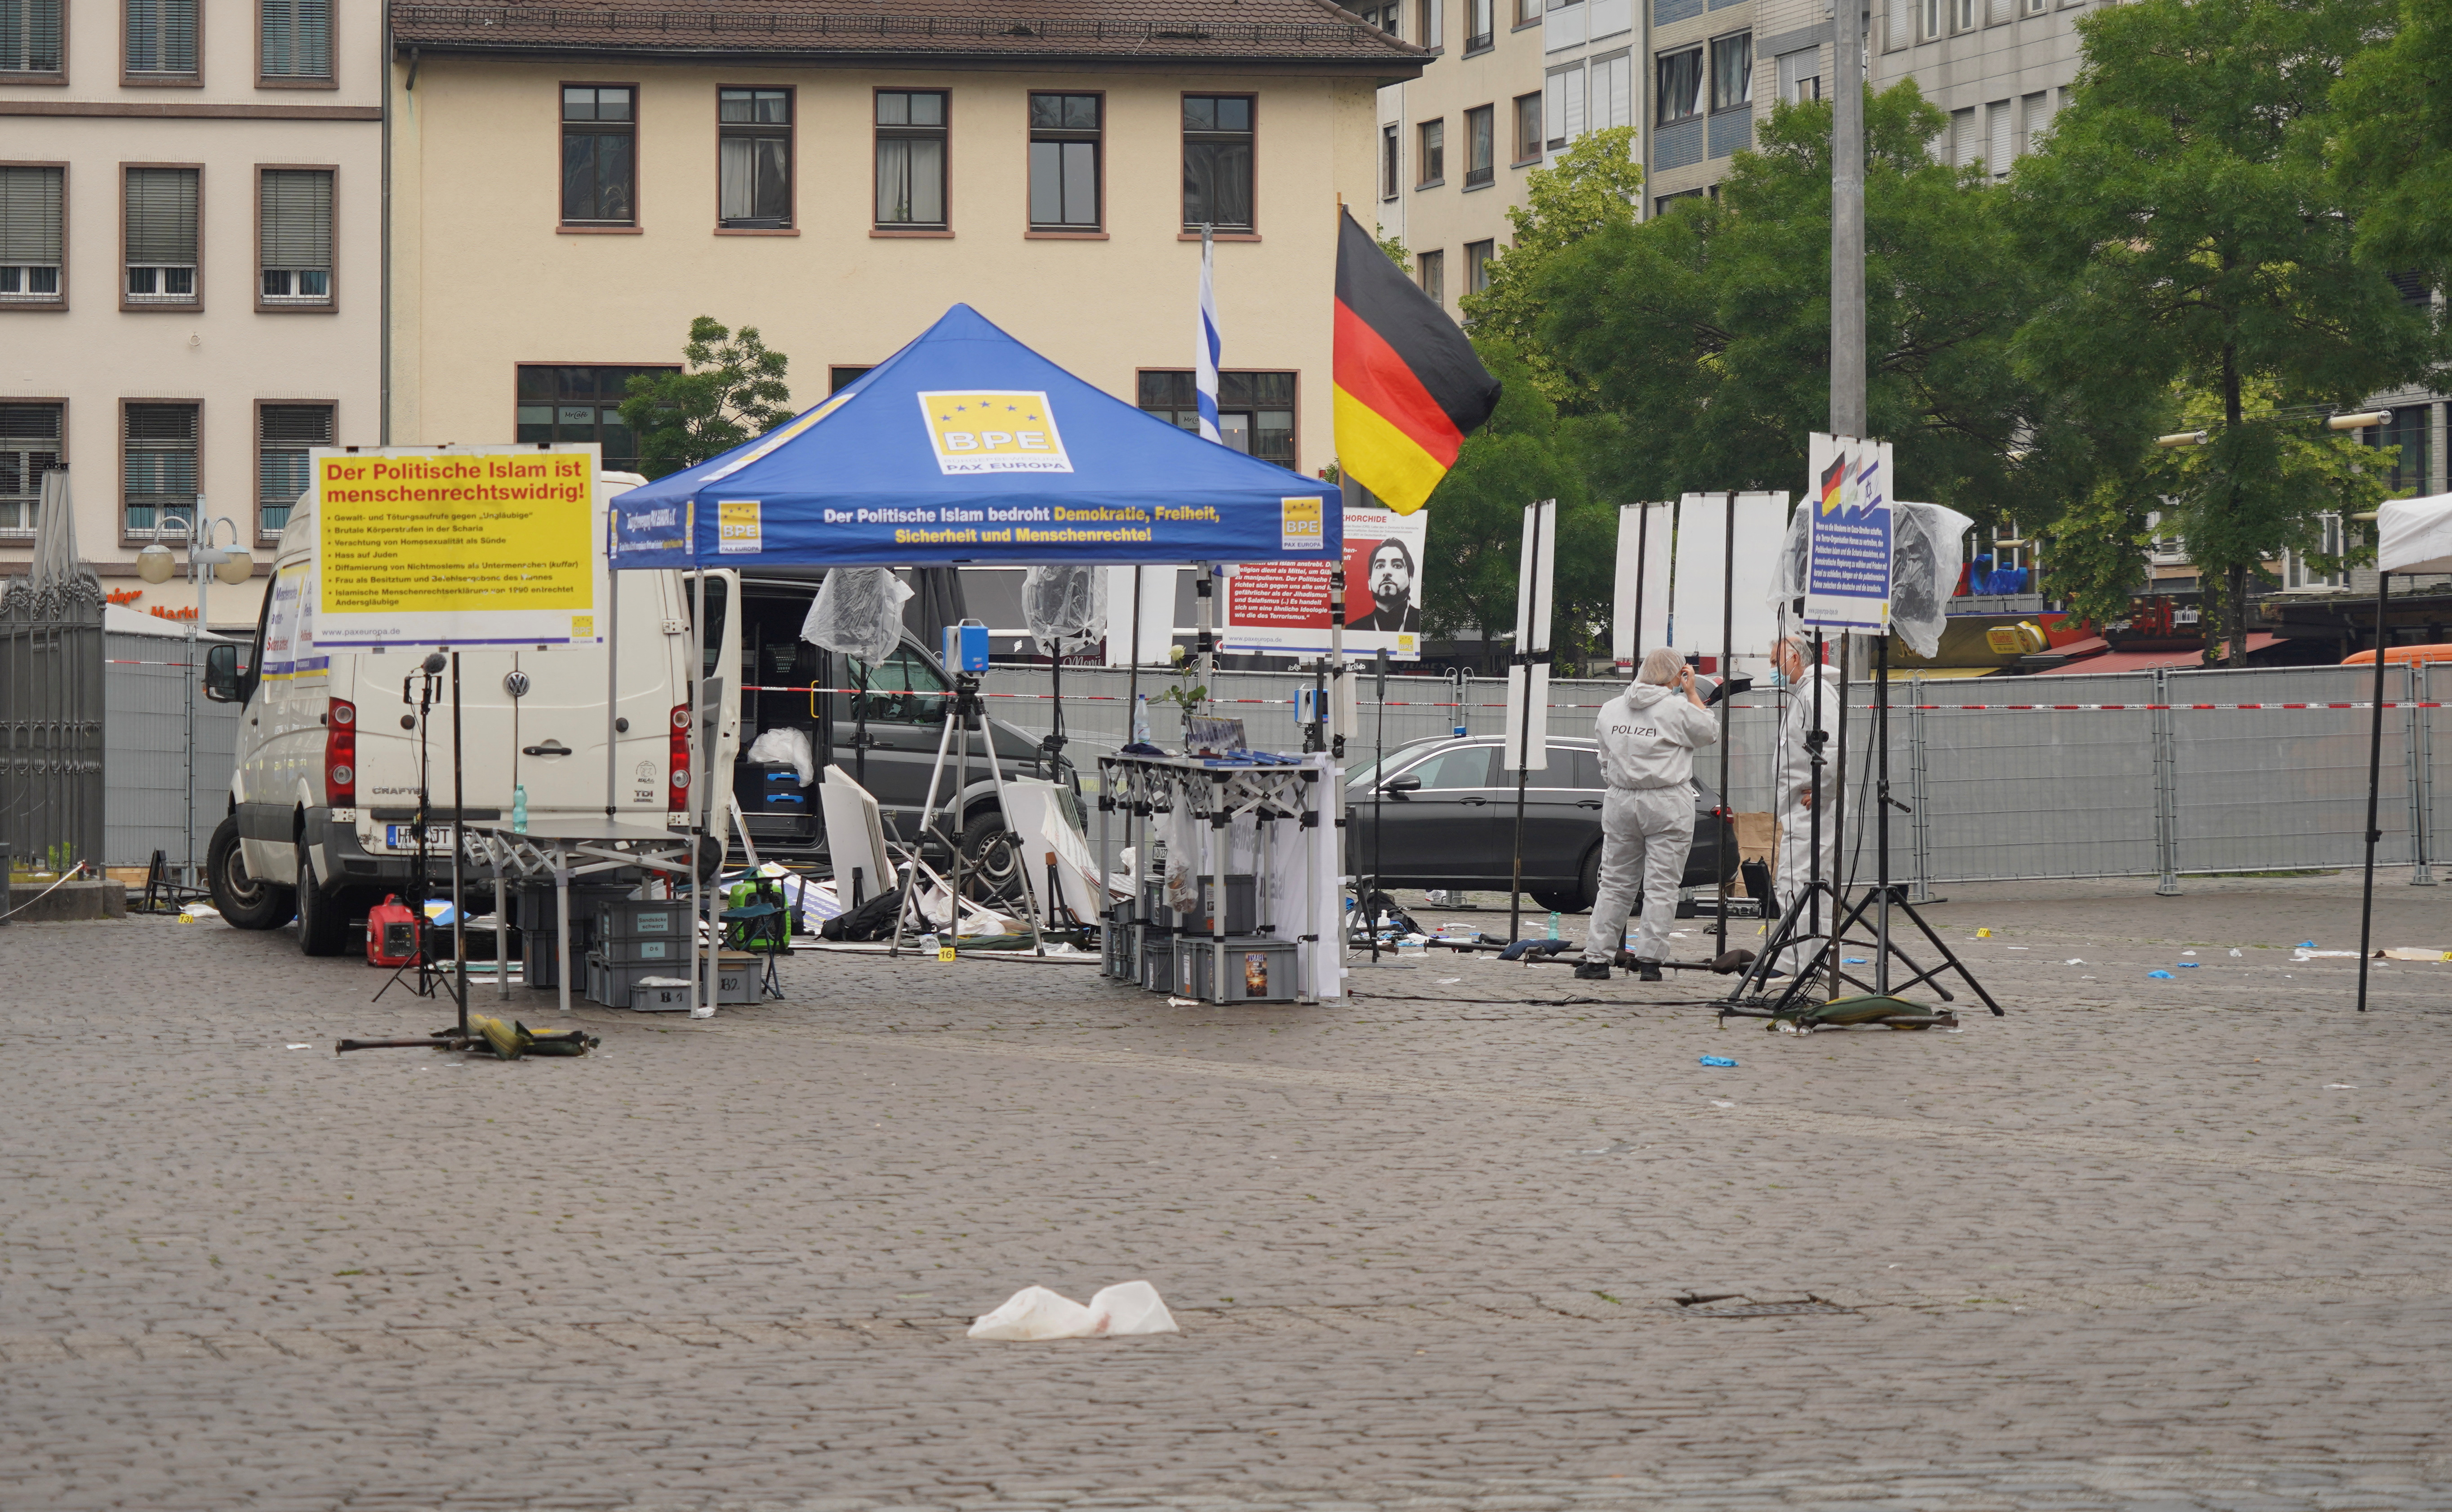 Police investigators work at the scene where a man attacked people in the central market of the city of Mannheim